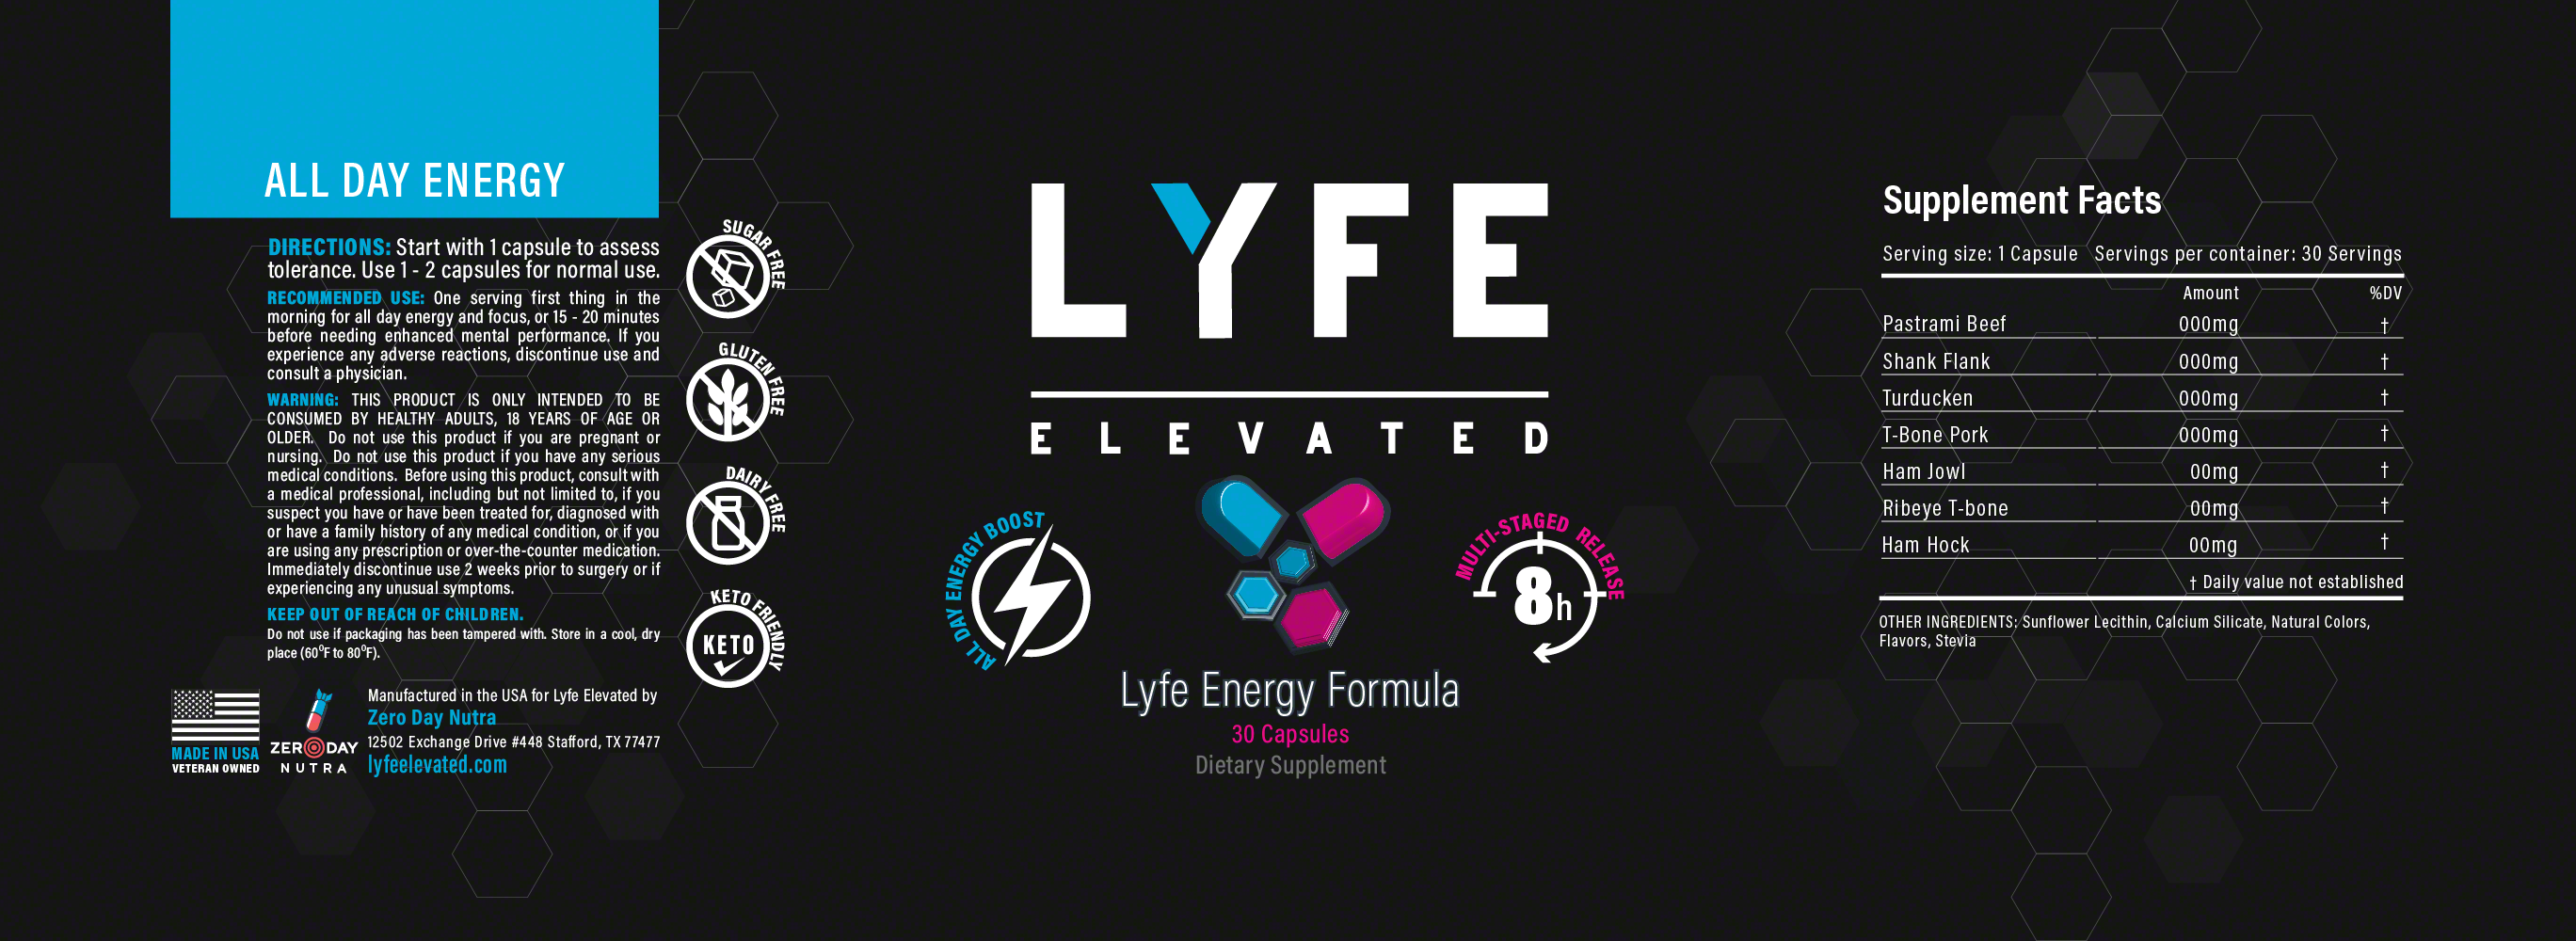 Dalya Kandil\'s logo, brand and marketing design for LyfeElevated. Formulation and marketing by Michael Ulisse.